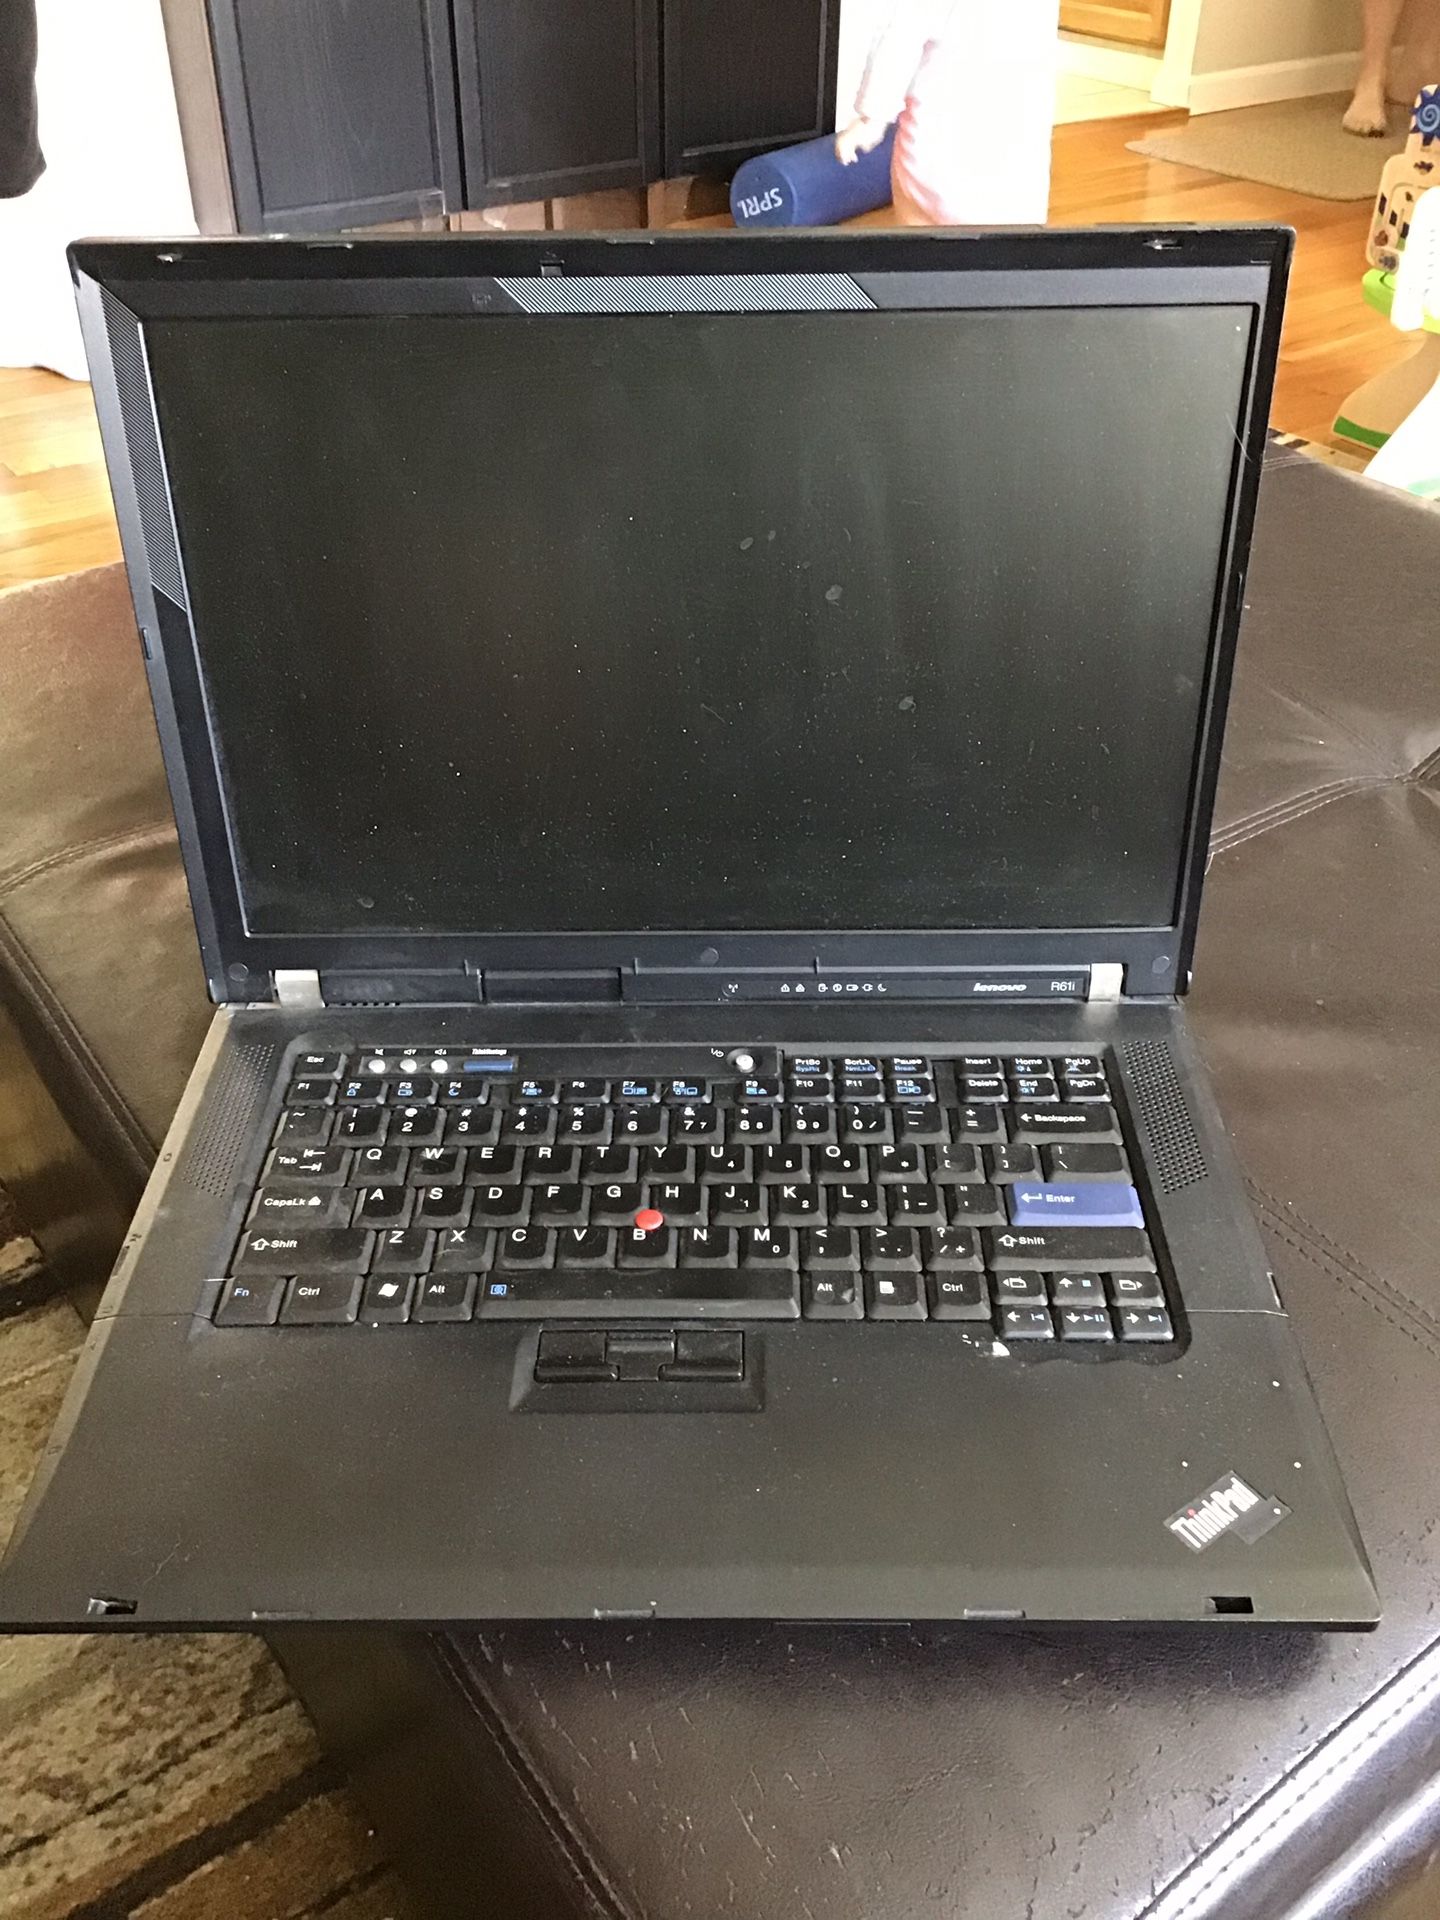 Laptop for parts only Lenovo R61i. LCD still works. No battery, no hard drive